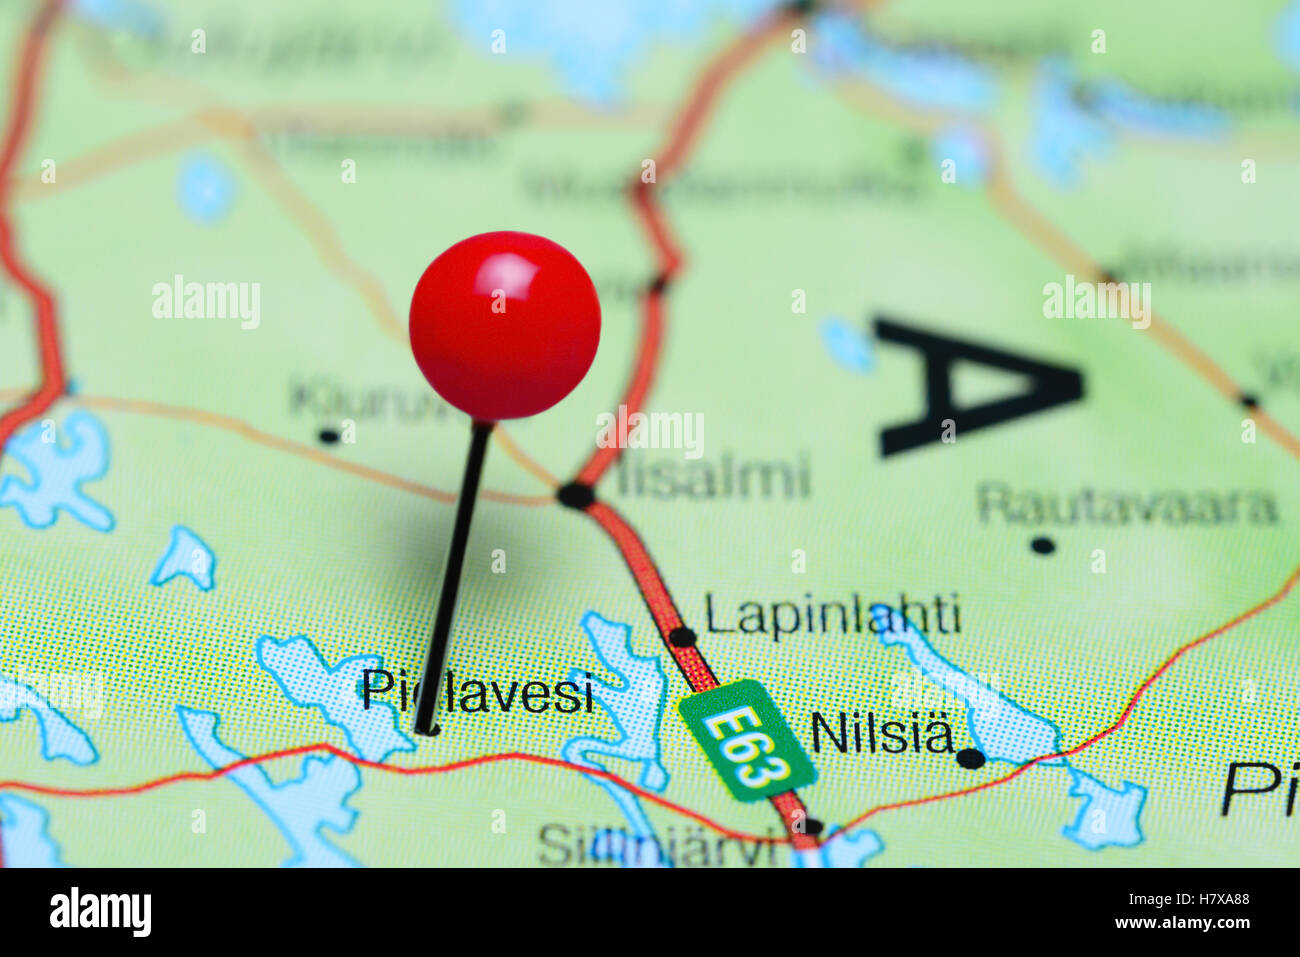 Pielavesi pinned on a map of Finland Stock Photo